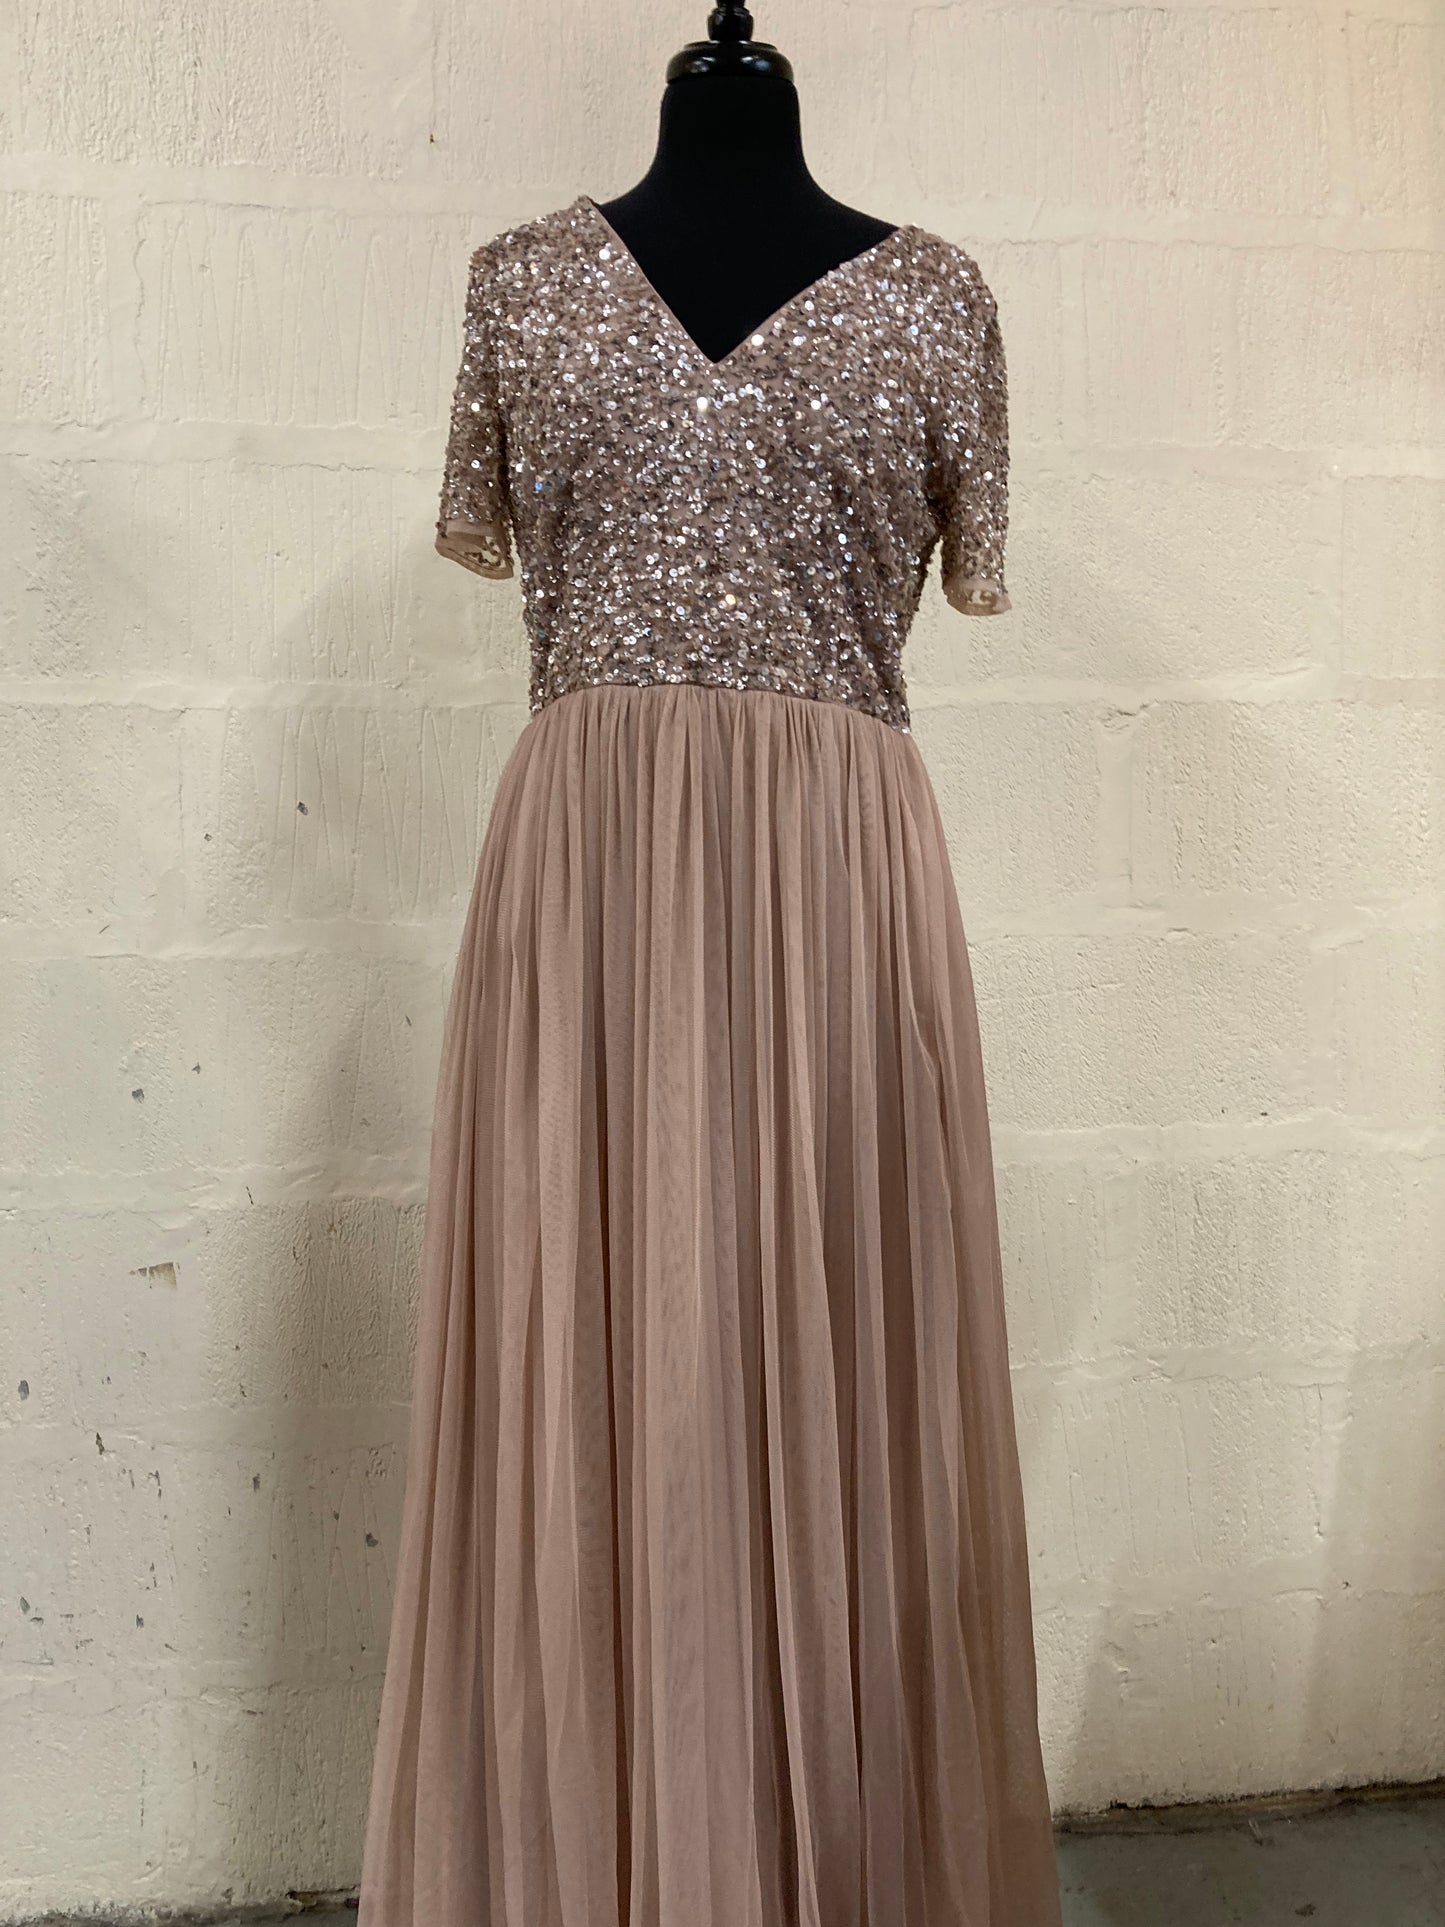 Rose Gold Sequin and Net Evening Gown Size 14